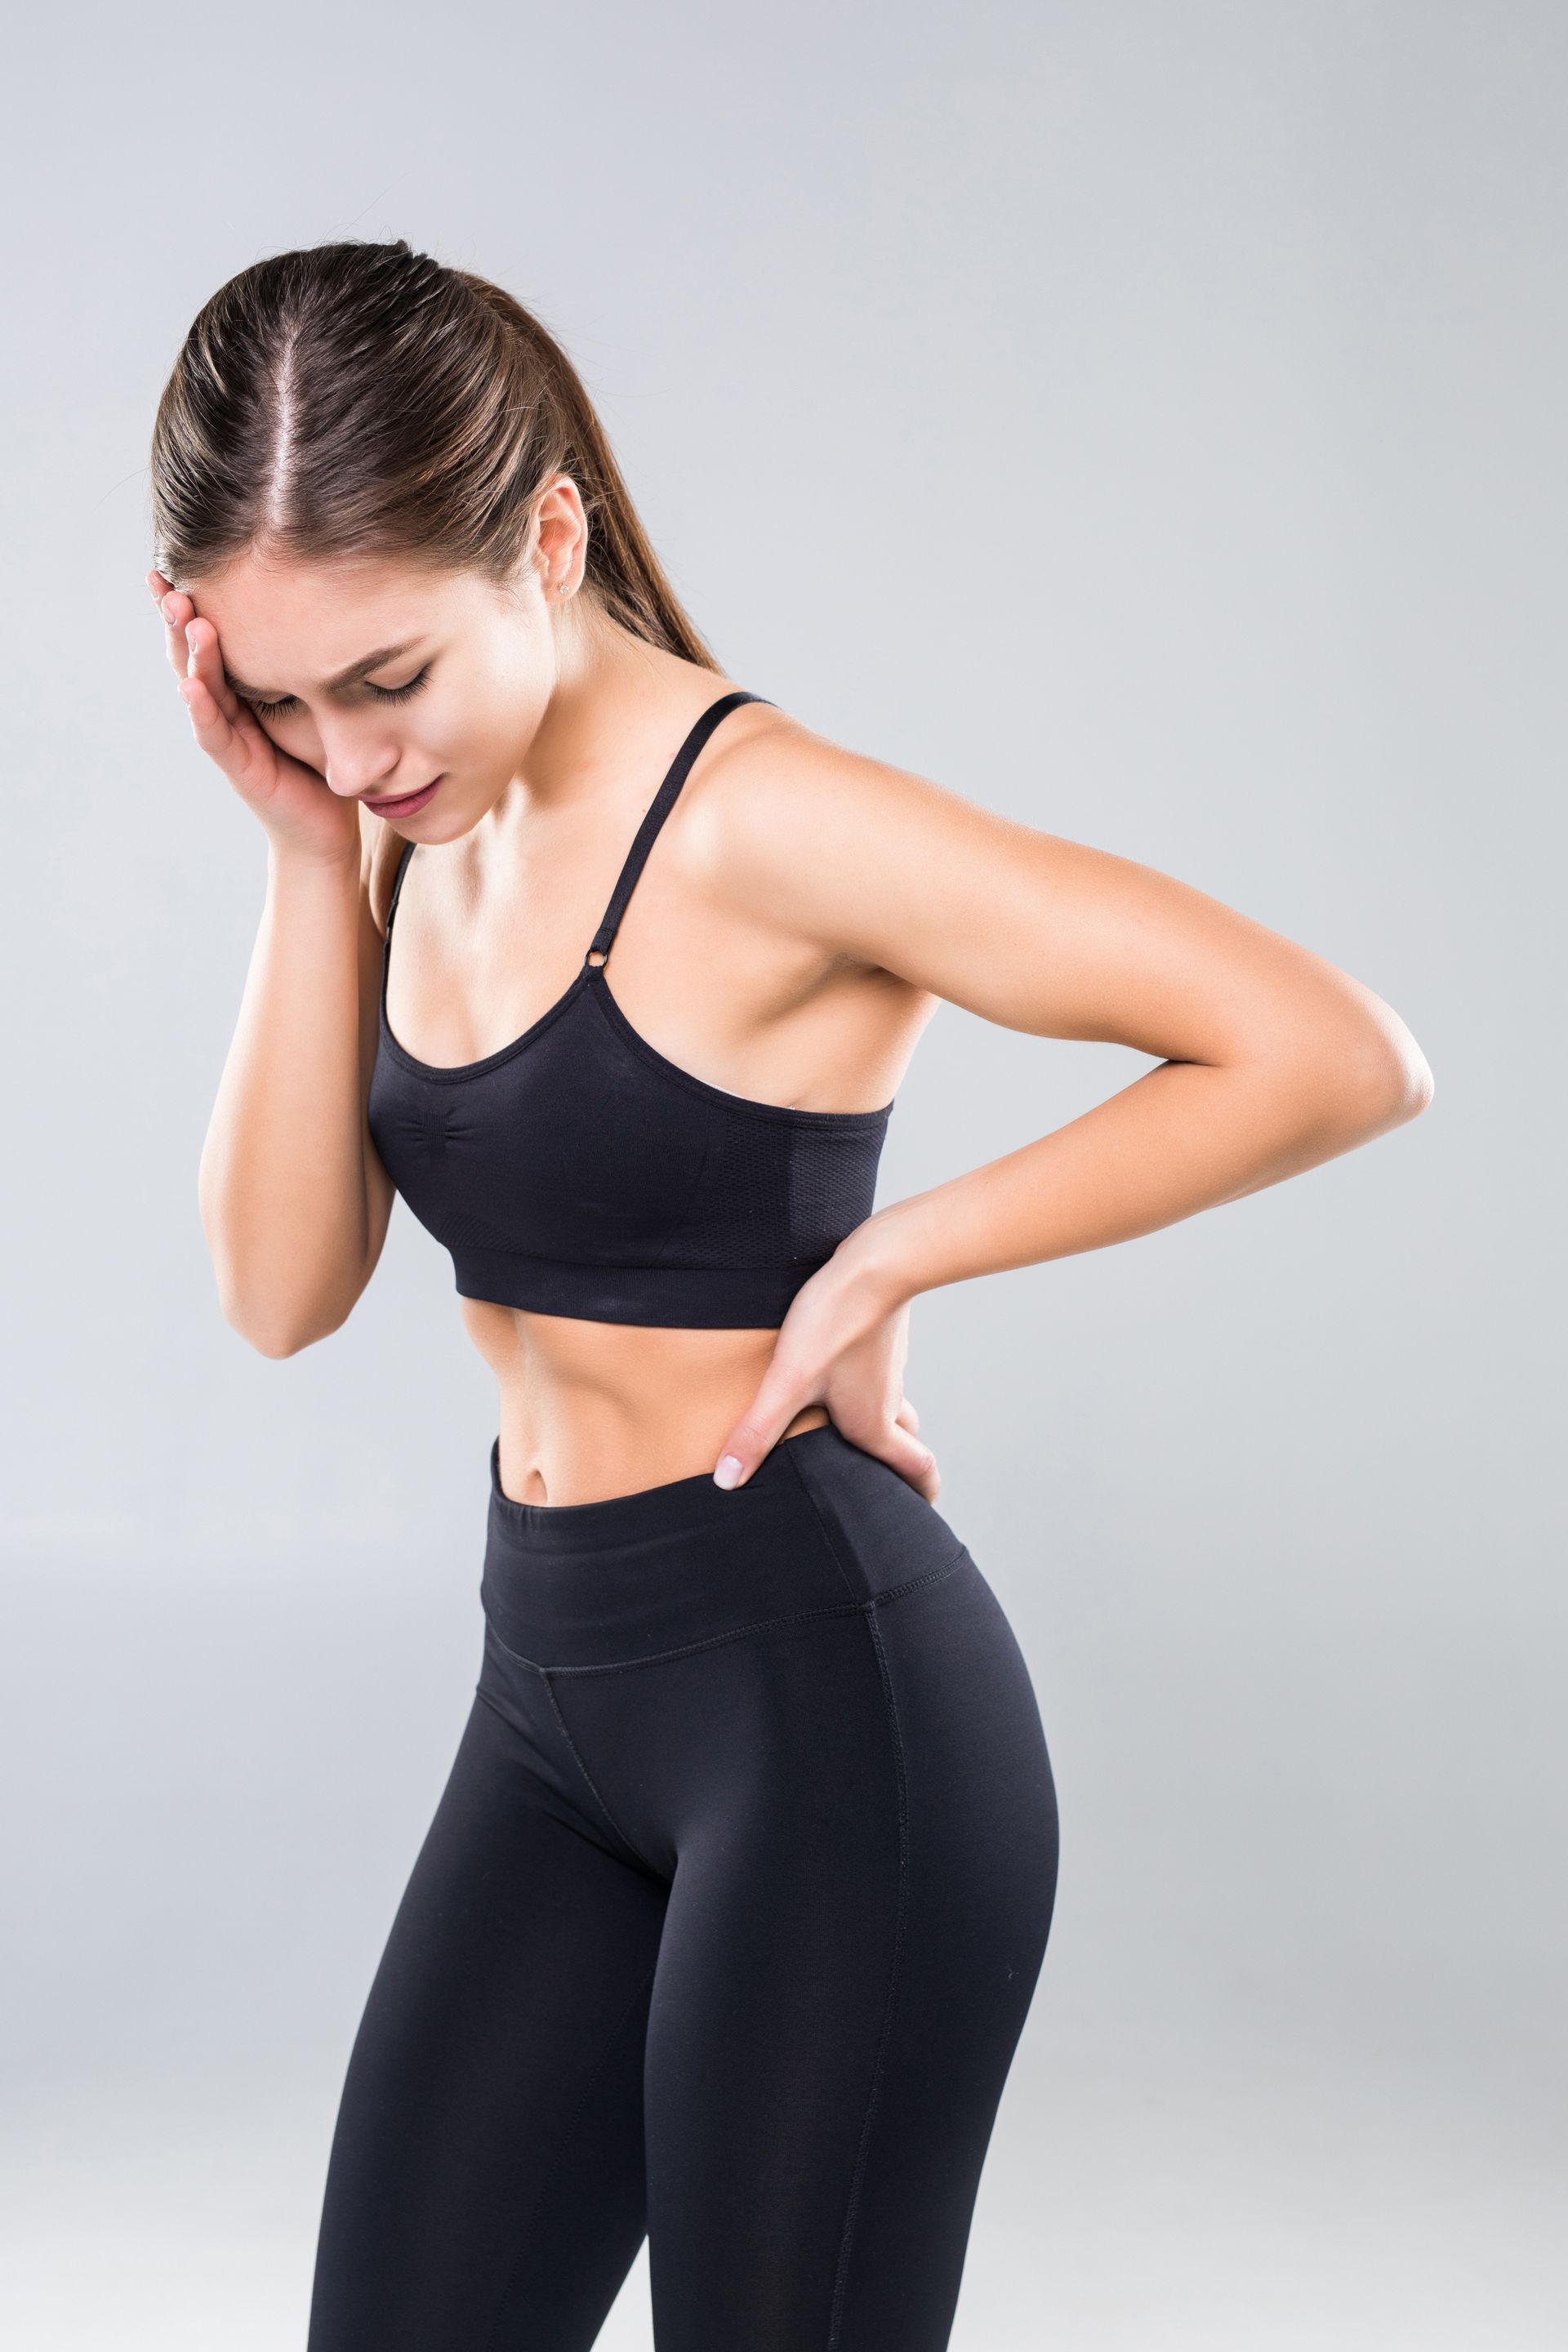 a woman in a sports bra and leggings is holding her back in pain .